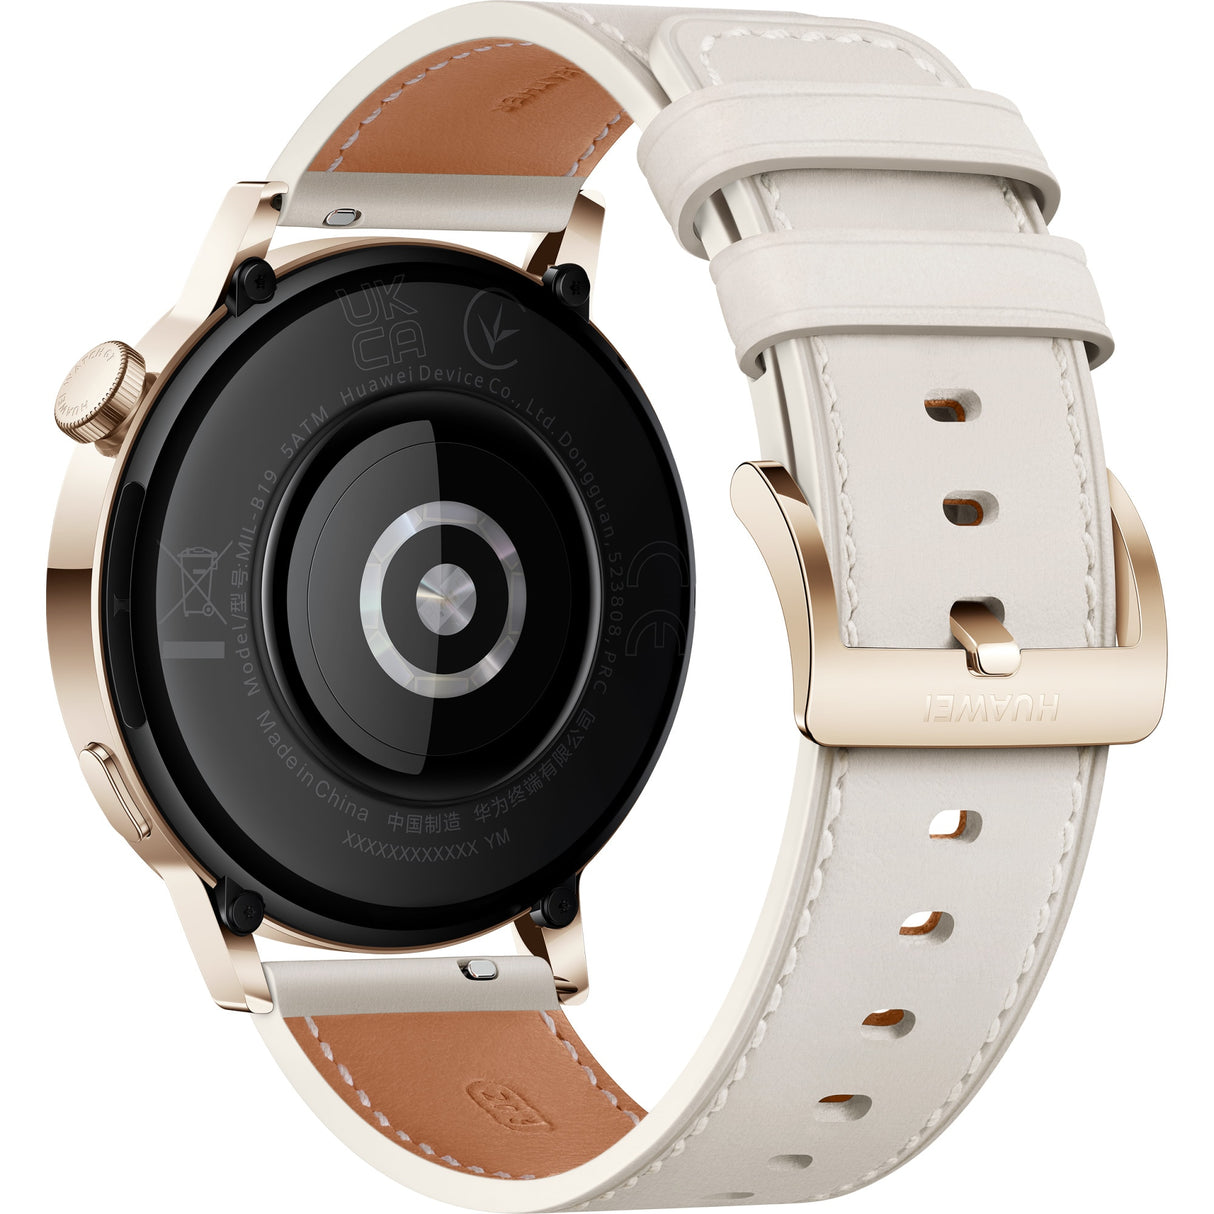 Huawei Watch GT 3, 42mm, Elegant Edition, White Leather - NotebookGsm